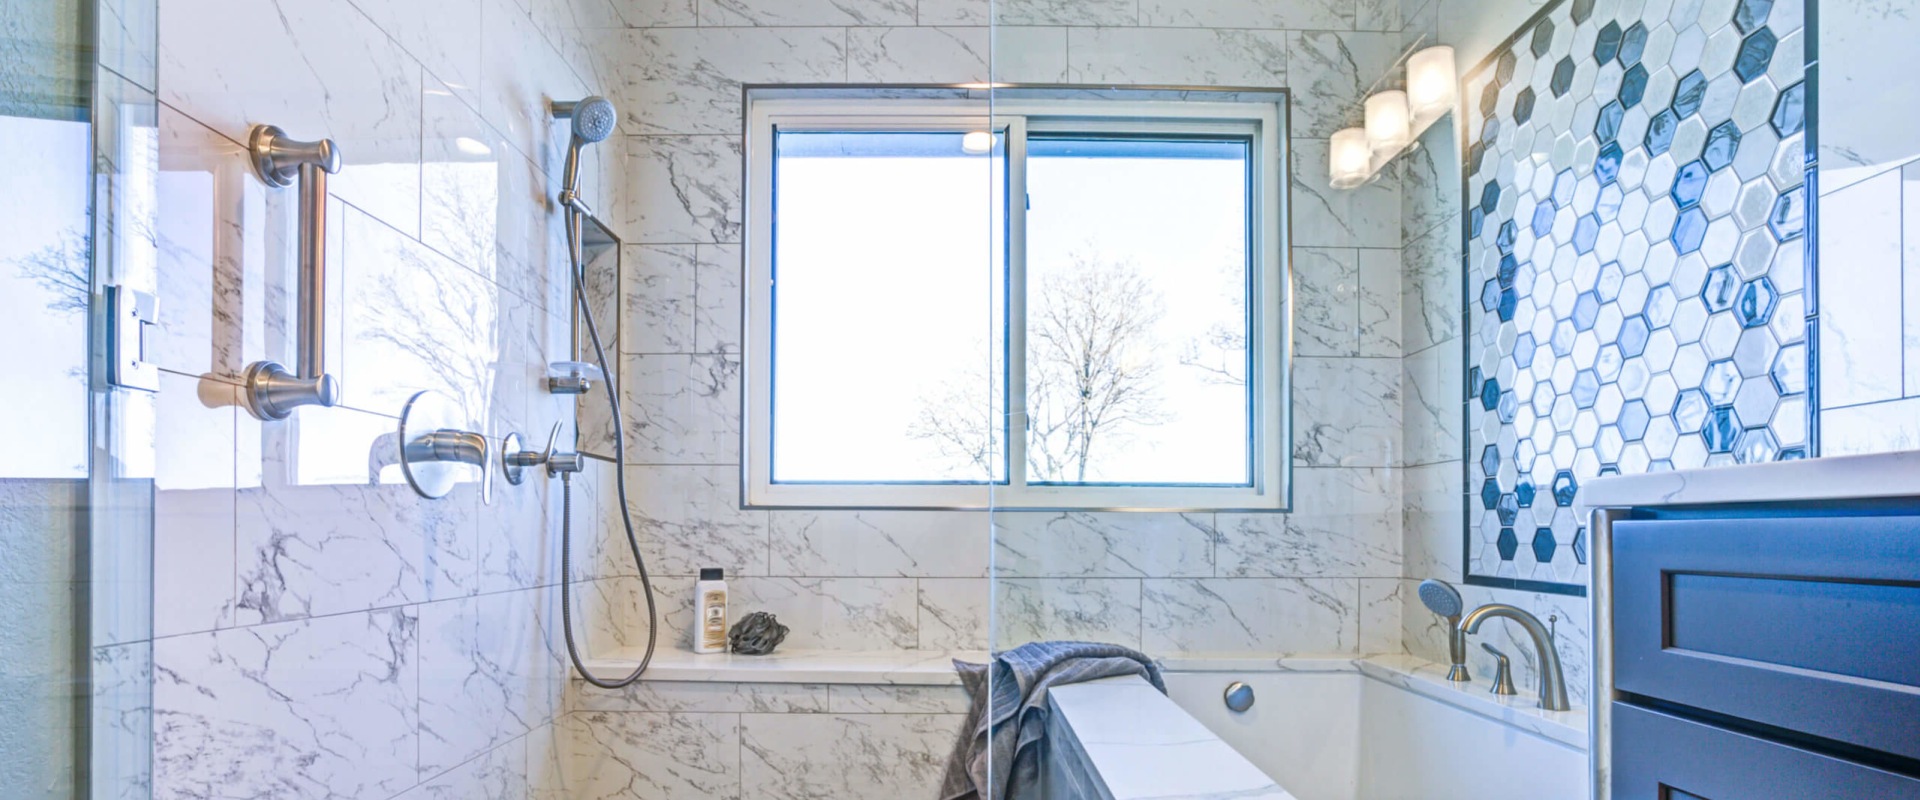 Are Frameless Shower Doors the Best Choice for Your Bathroom?